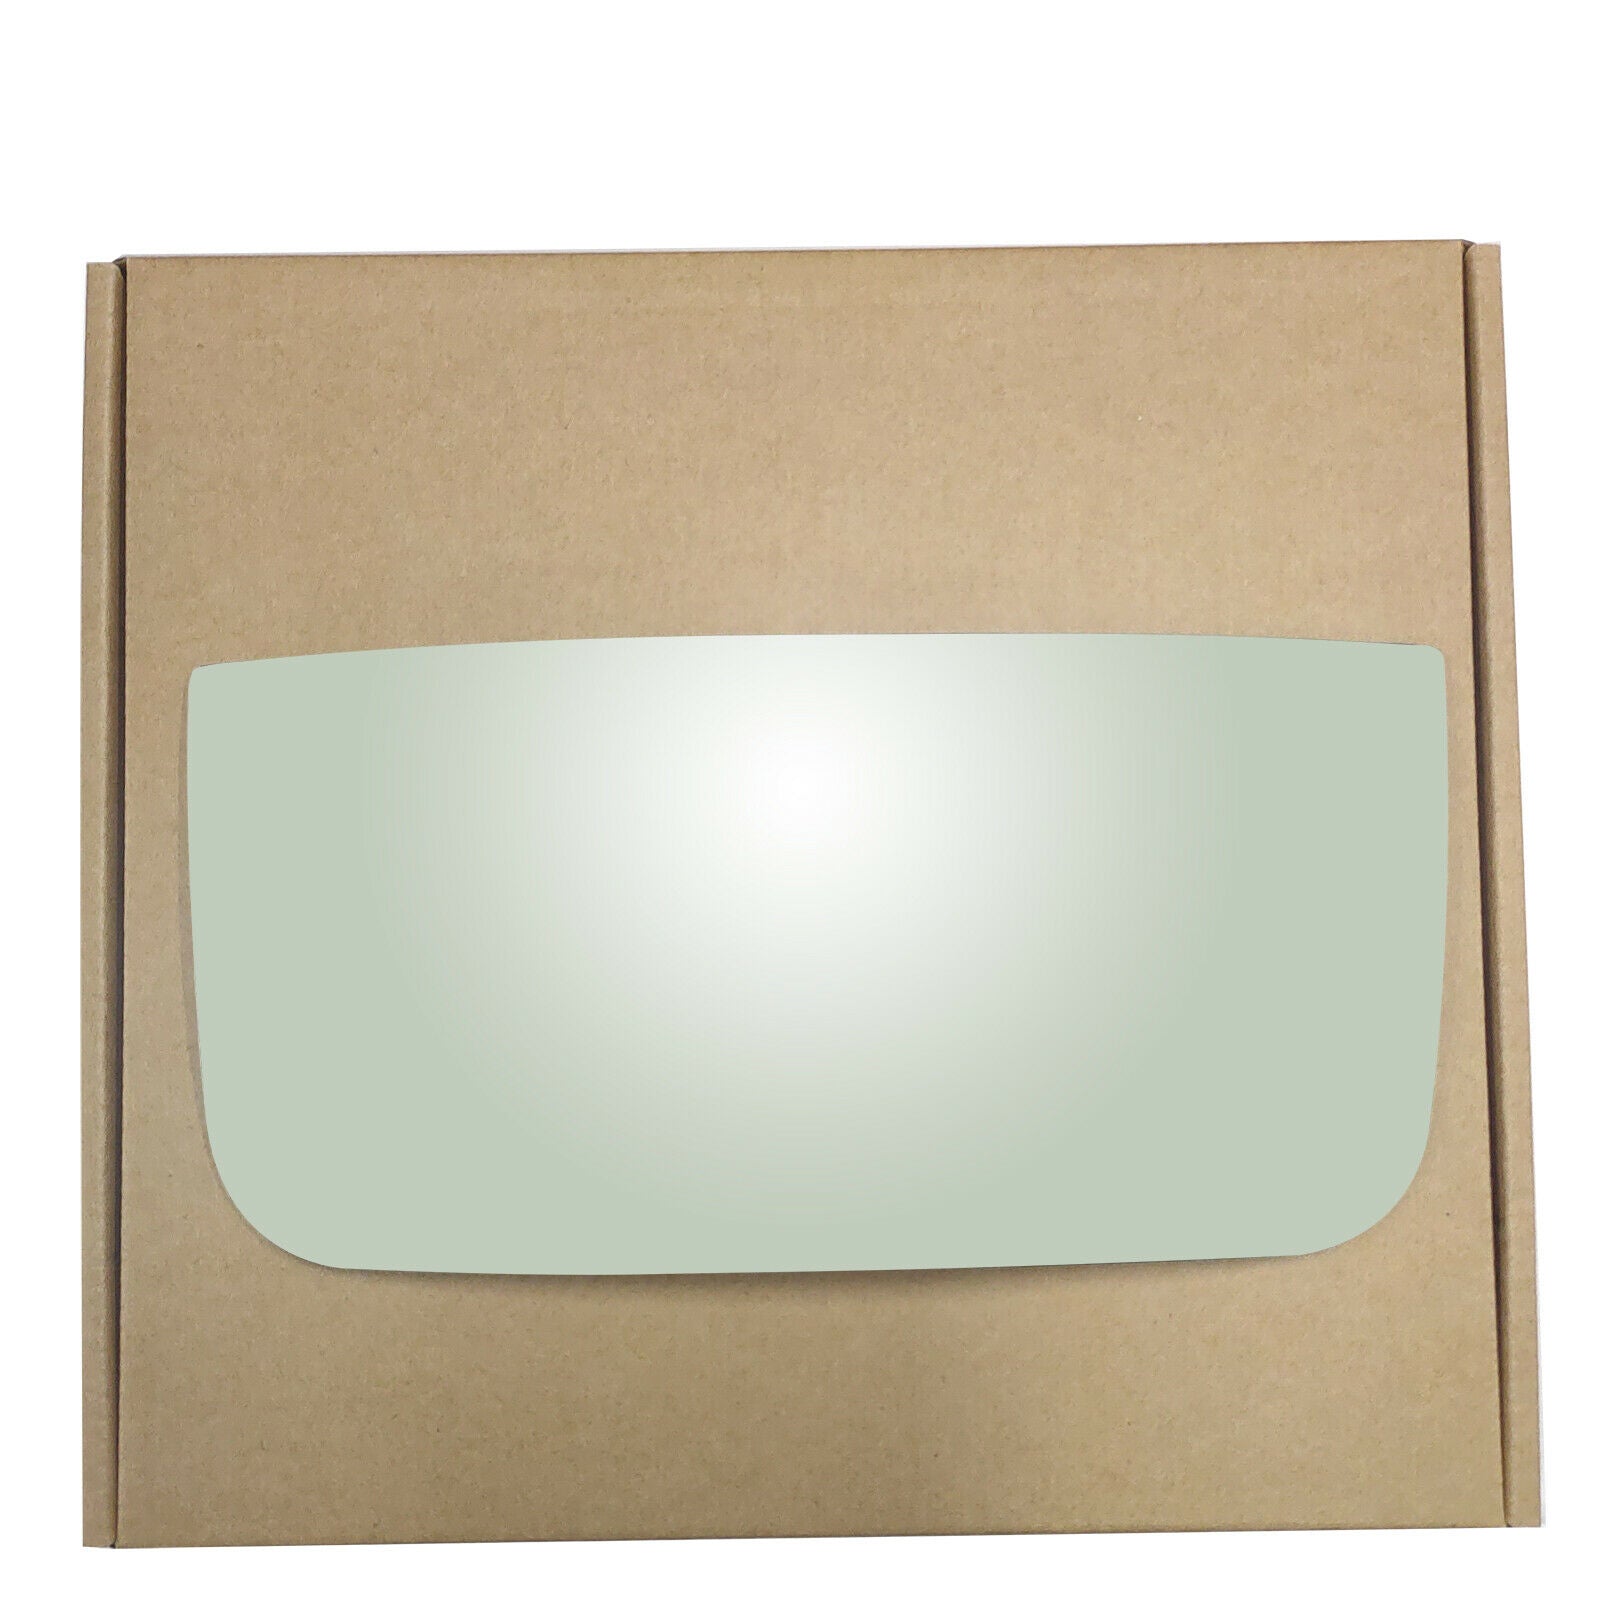 WLLW Towing Lower Mirror Glass Replacement for 03-19 Chevrolet Express 1500 2500 3500/92-02 Ford Econoline/02-07 GMC Savana , Driver Left LH/Passenger Right RH/The Both Sides Convex M-0032